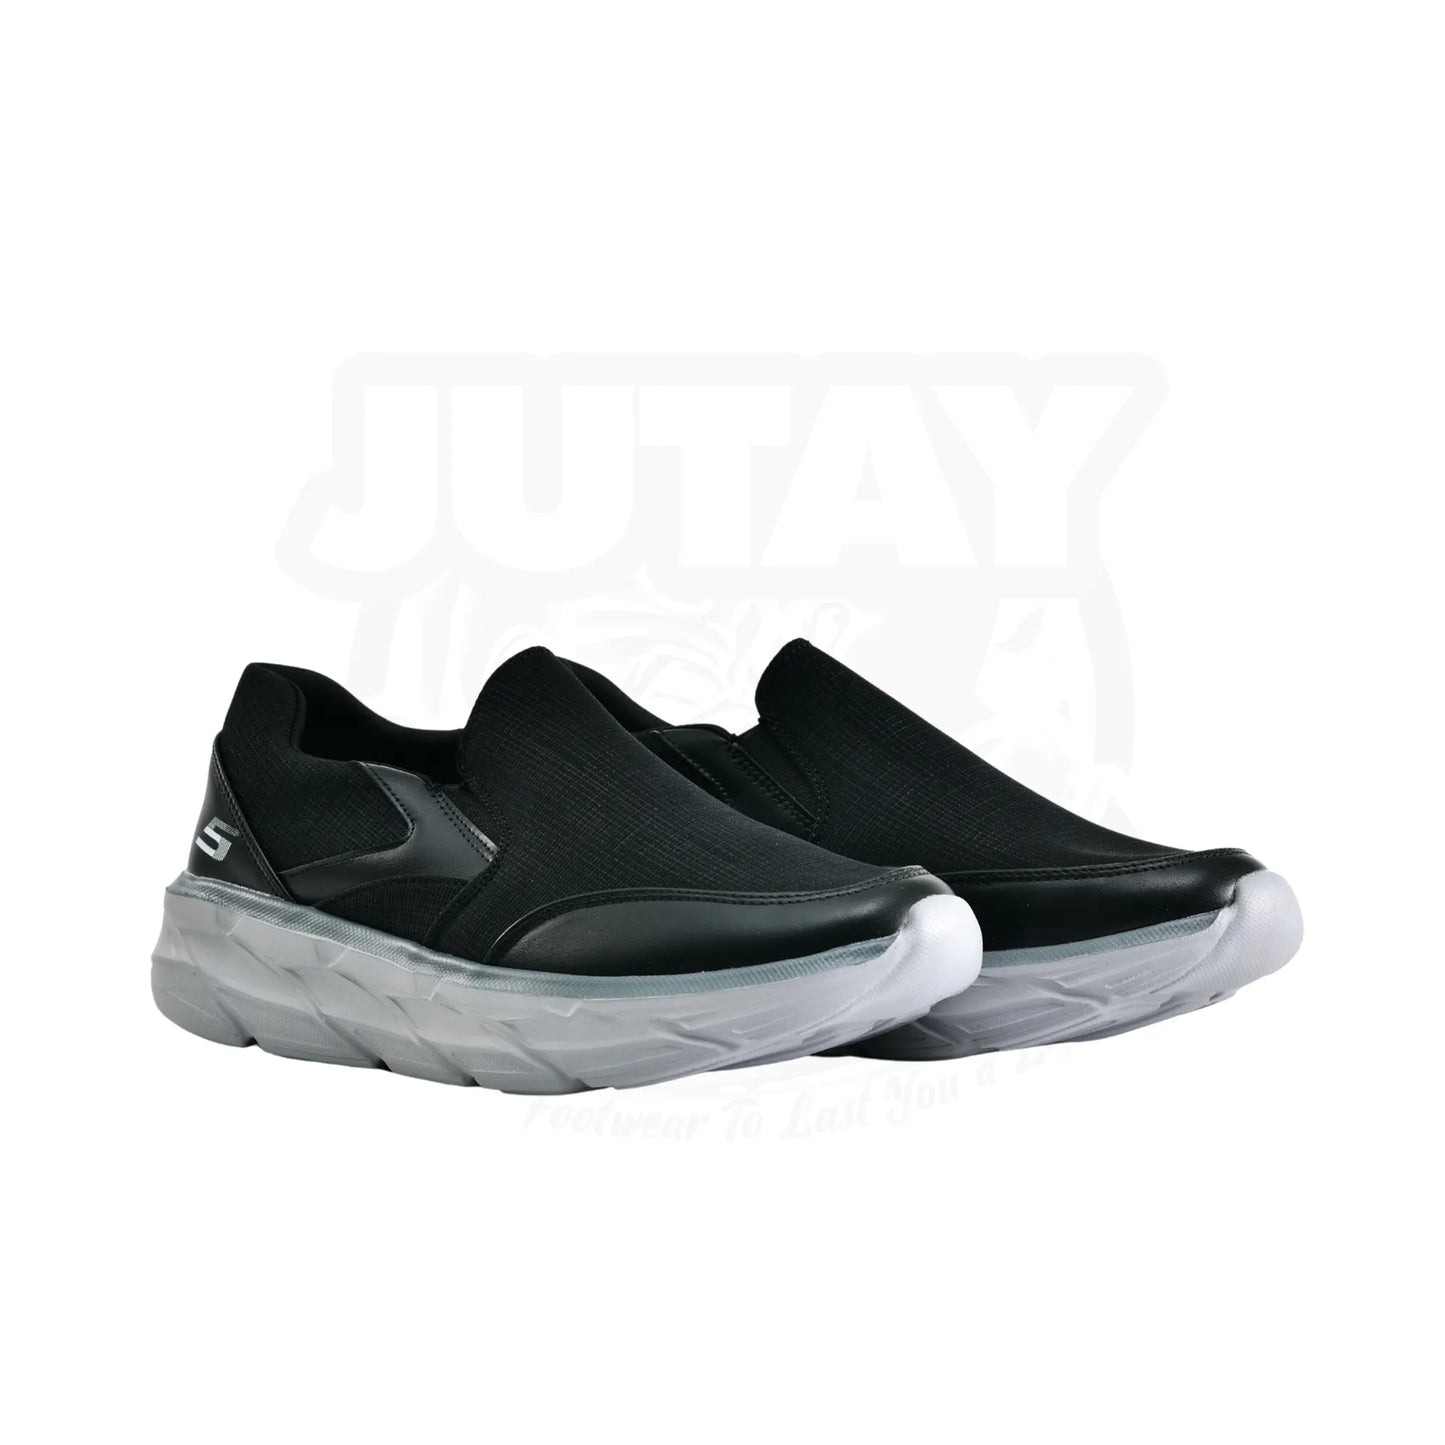 SKECHERS RELAXED FIT - BLACK